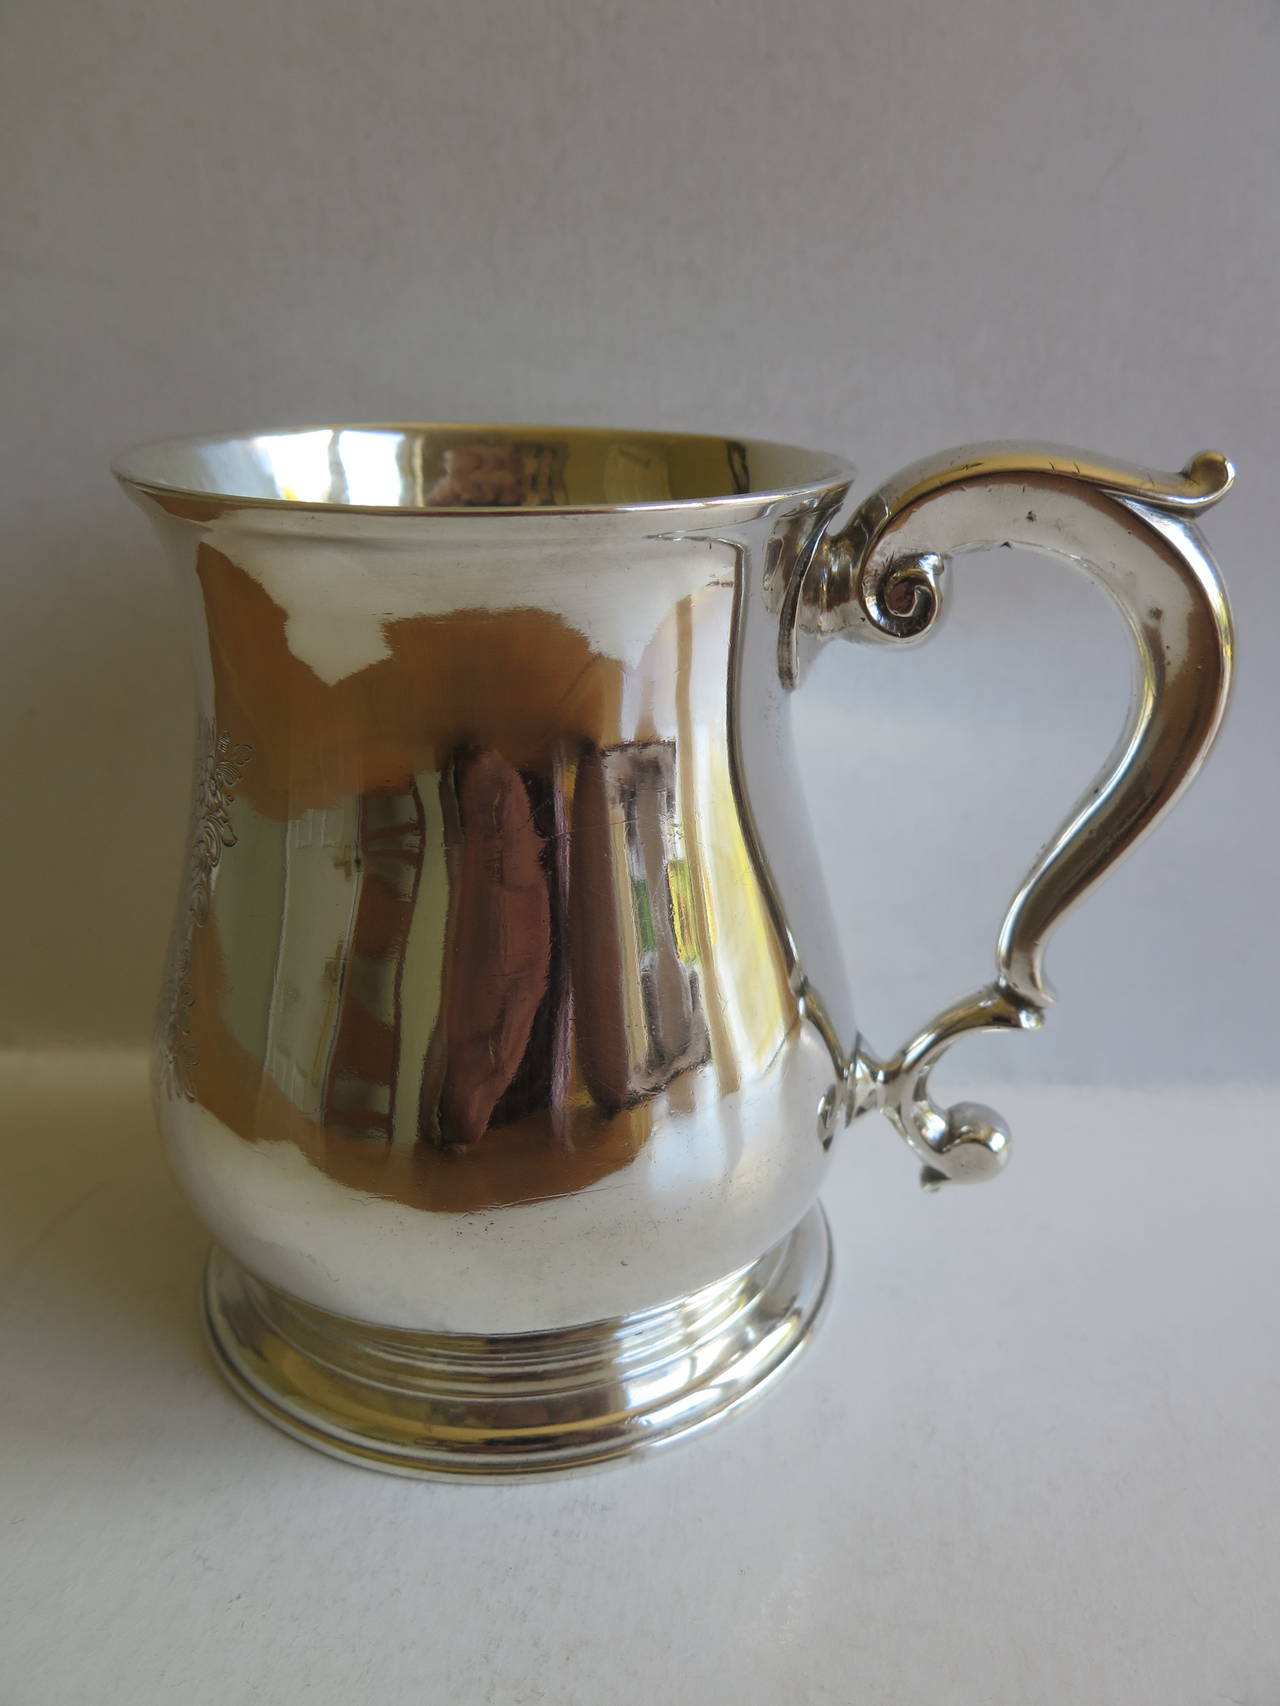 This is a fine English, Early Georgian, Sterling Silver Mug, made by Benjamin Cartwright, a silversmith of London, in 1735.

The mug has a classic baluster, pear shaped body with a slightly flaired rim, spreading foot with low pedestal and a double